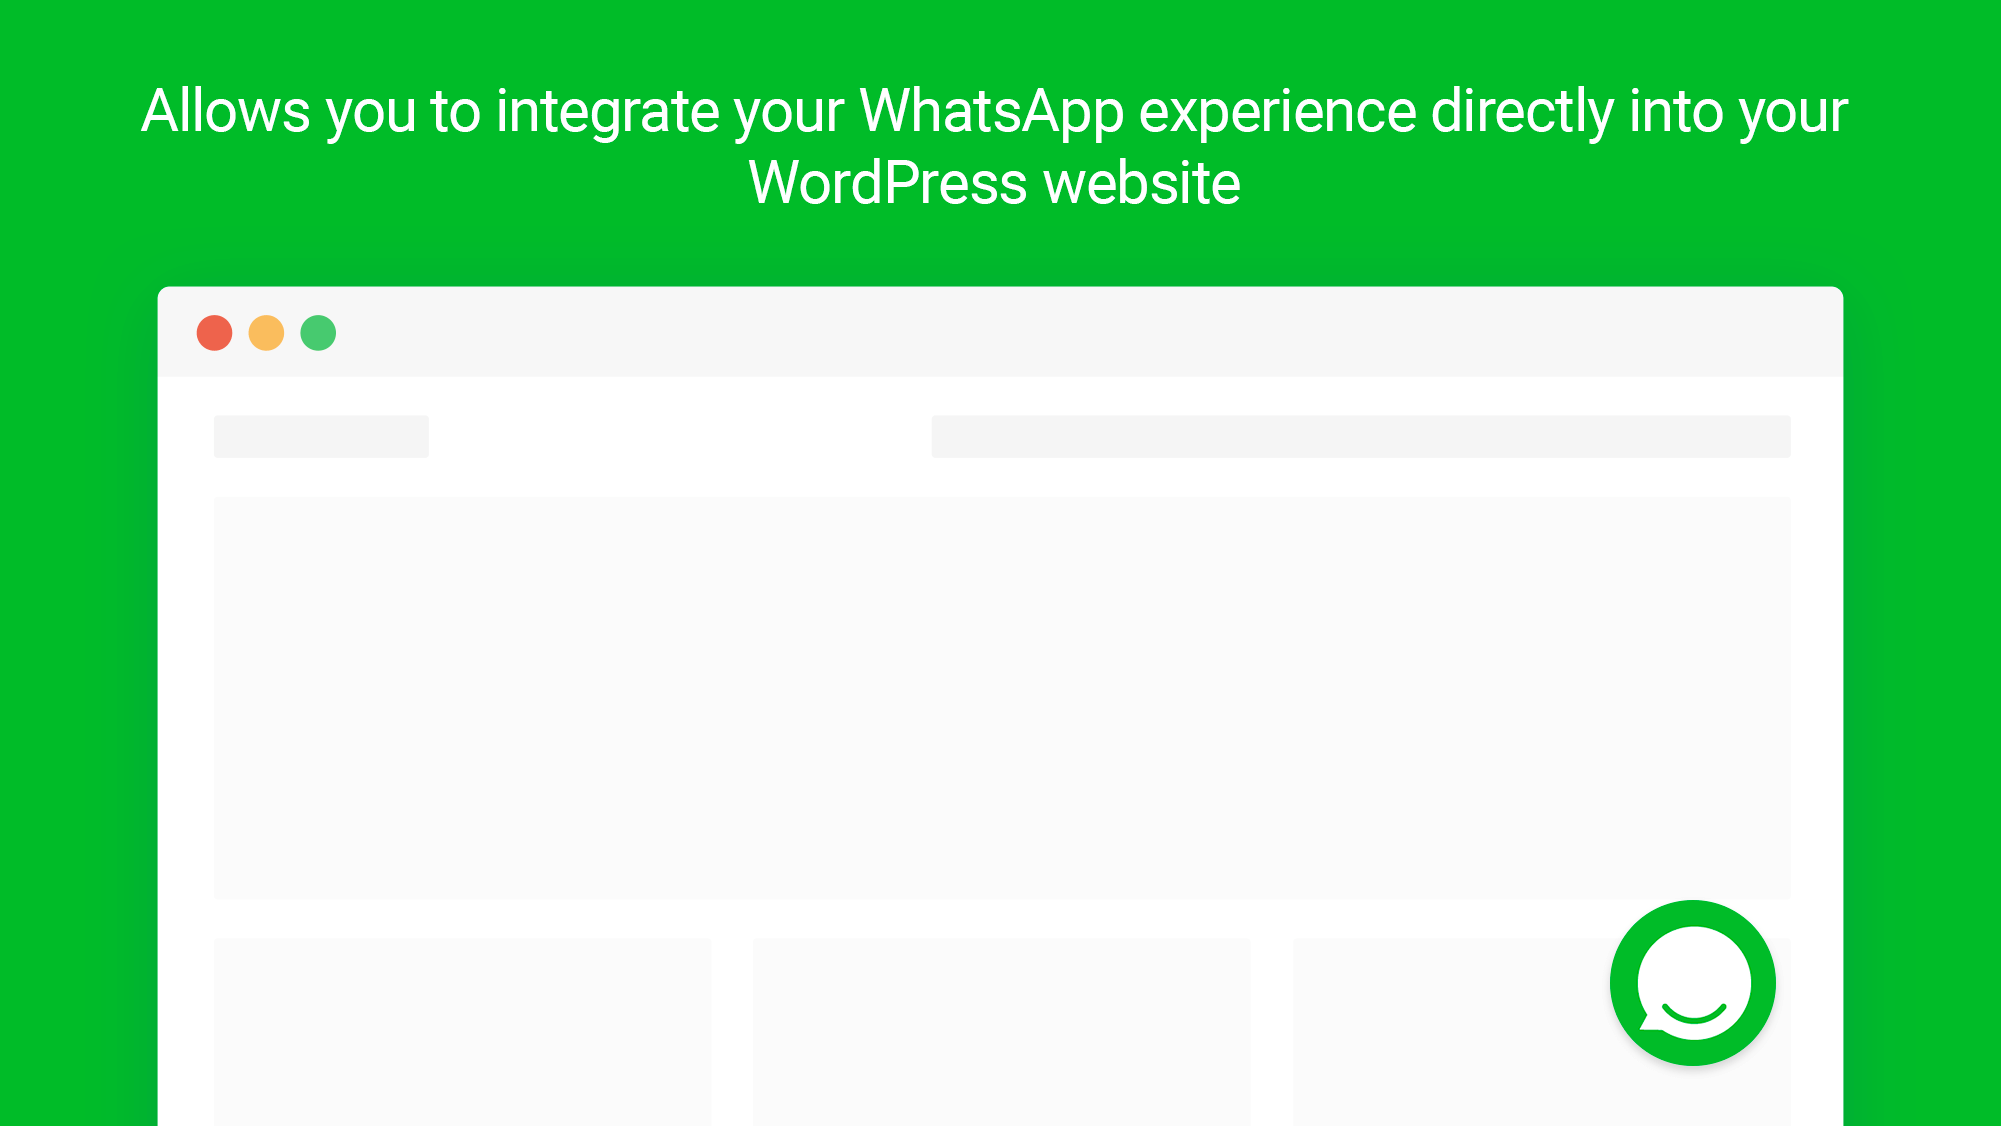 Allows you to integrate your WhatsApp experience directly into your WordPress website